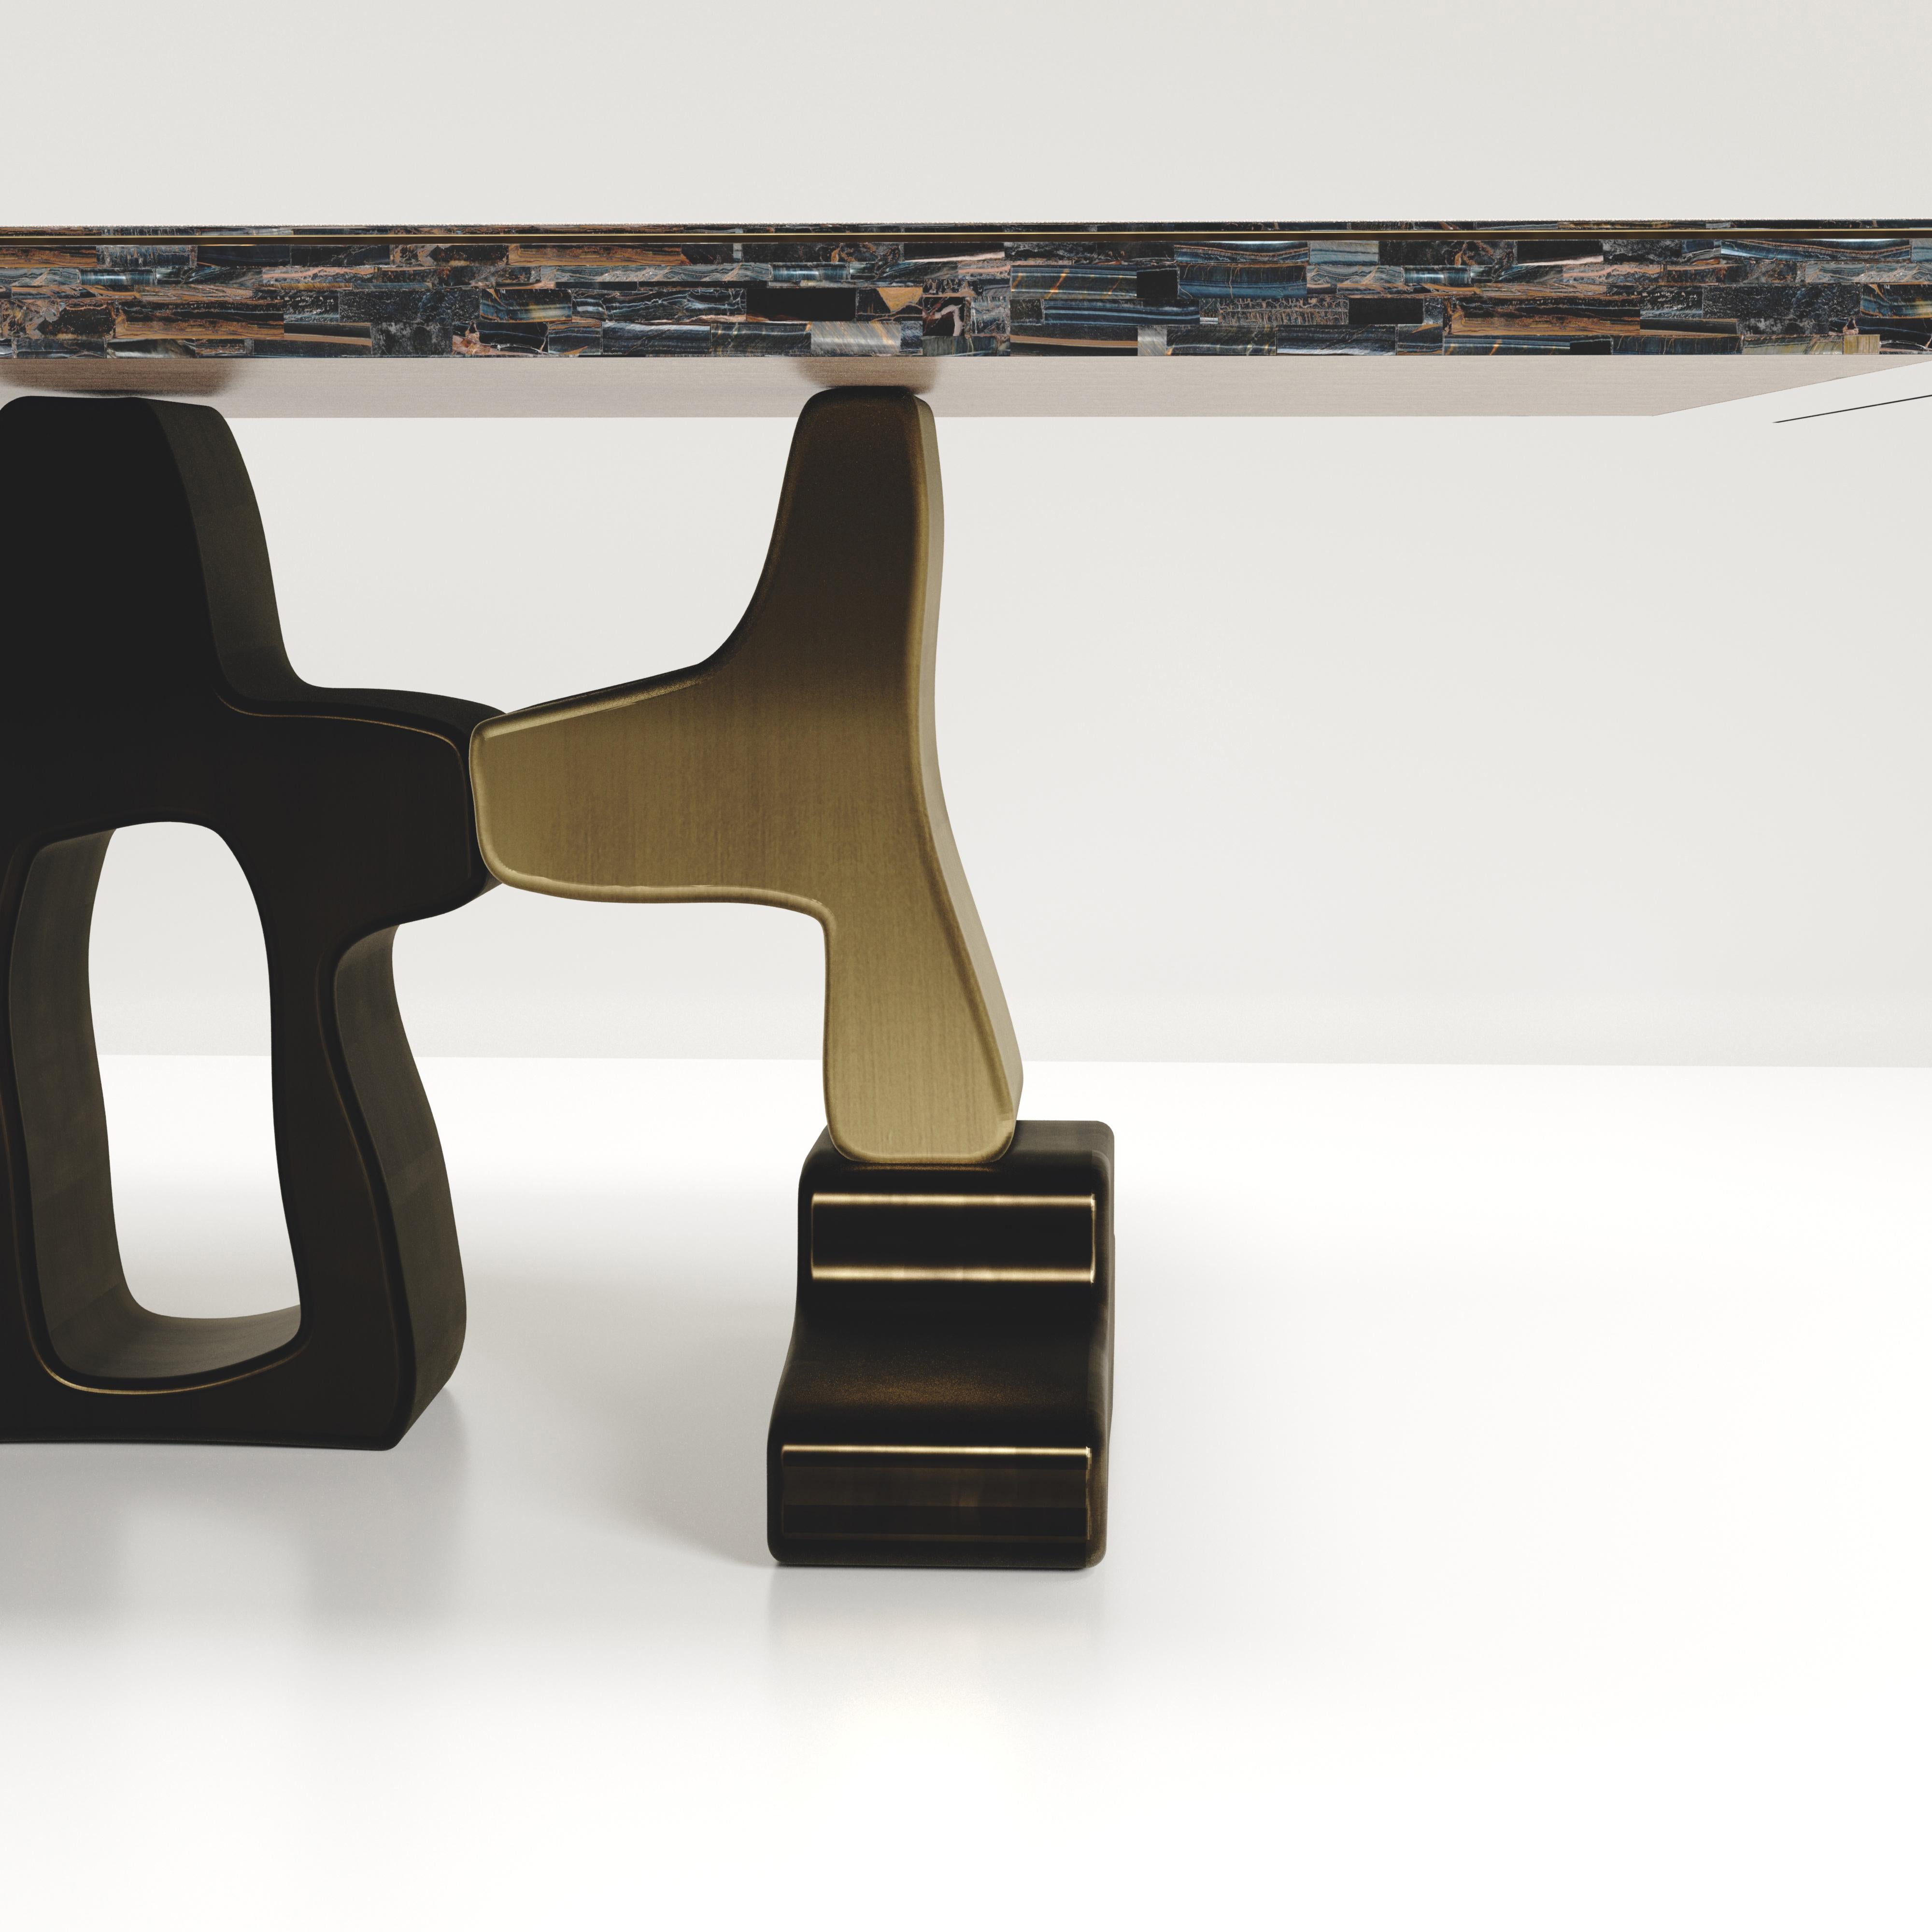 Shagreen Inlaid Dining Table with Bronze Patina Brass Details by Kifu Paris In New Condition For Sale In New York, NY